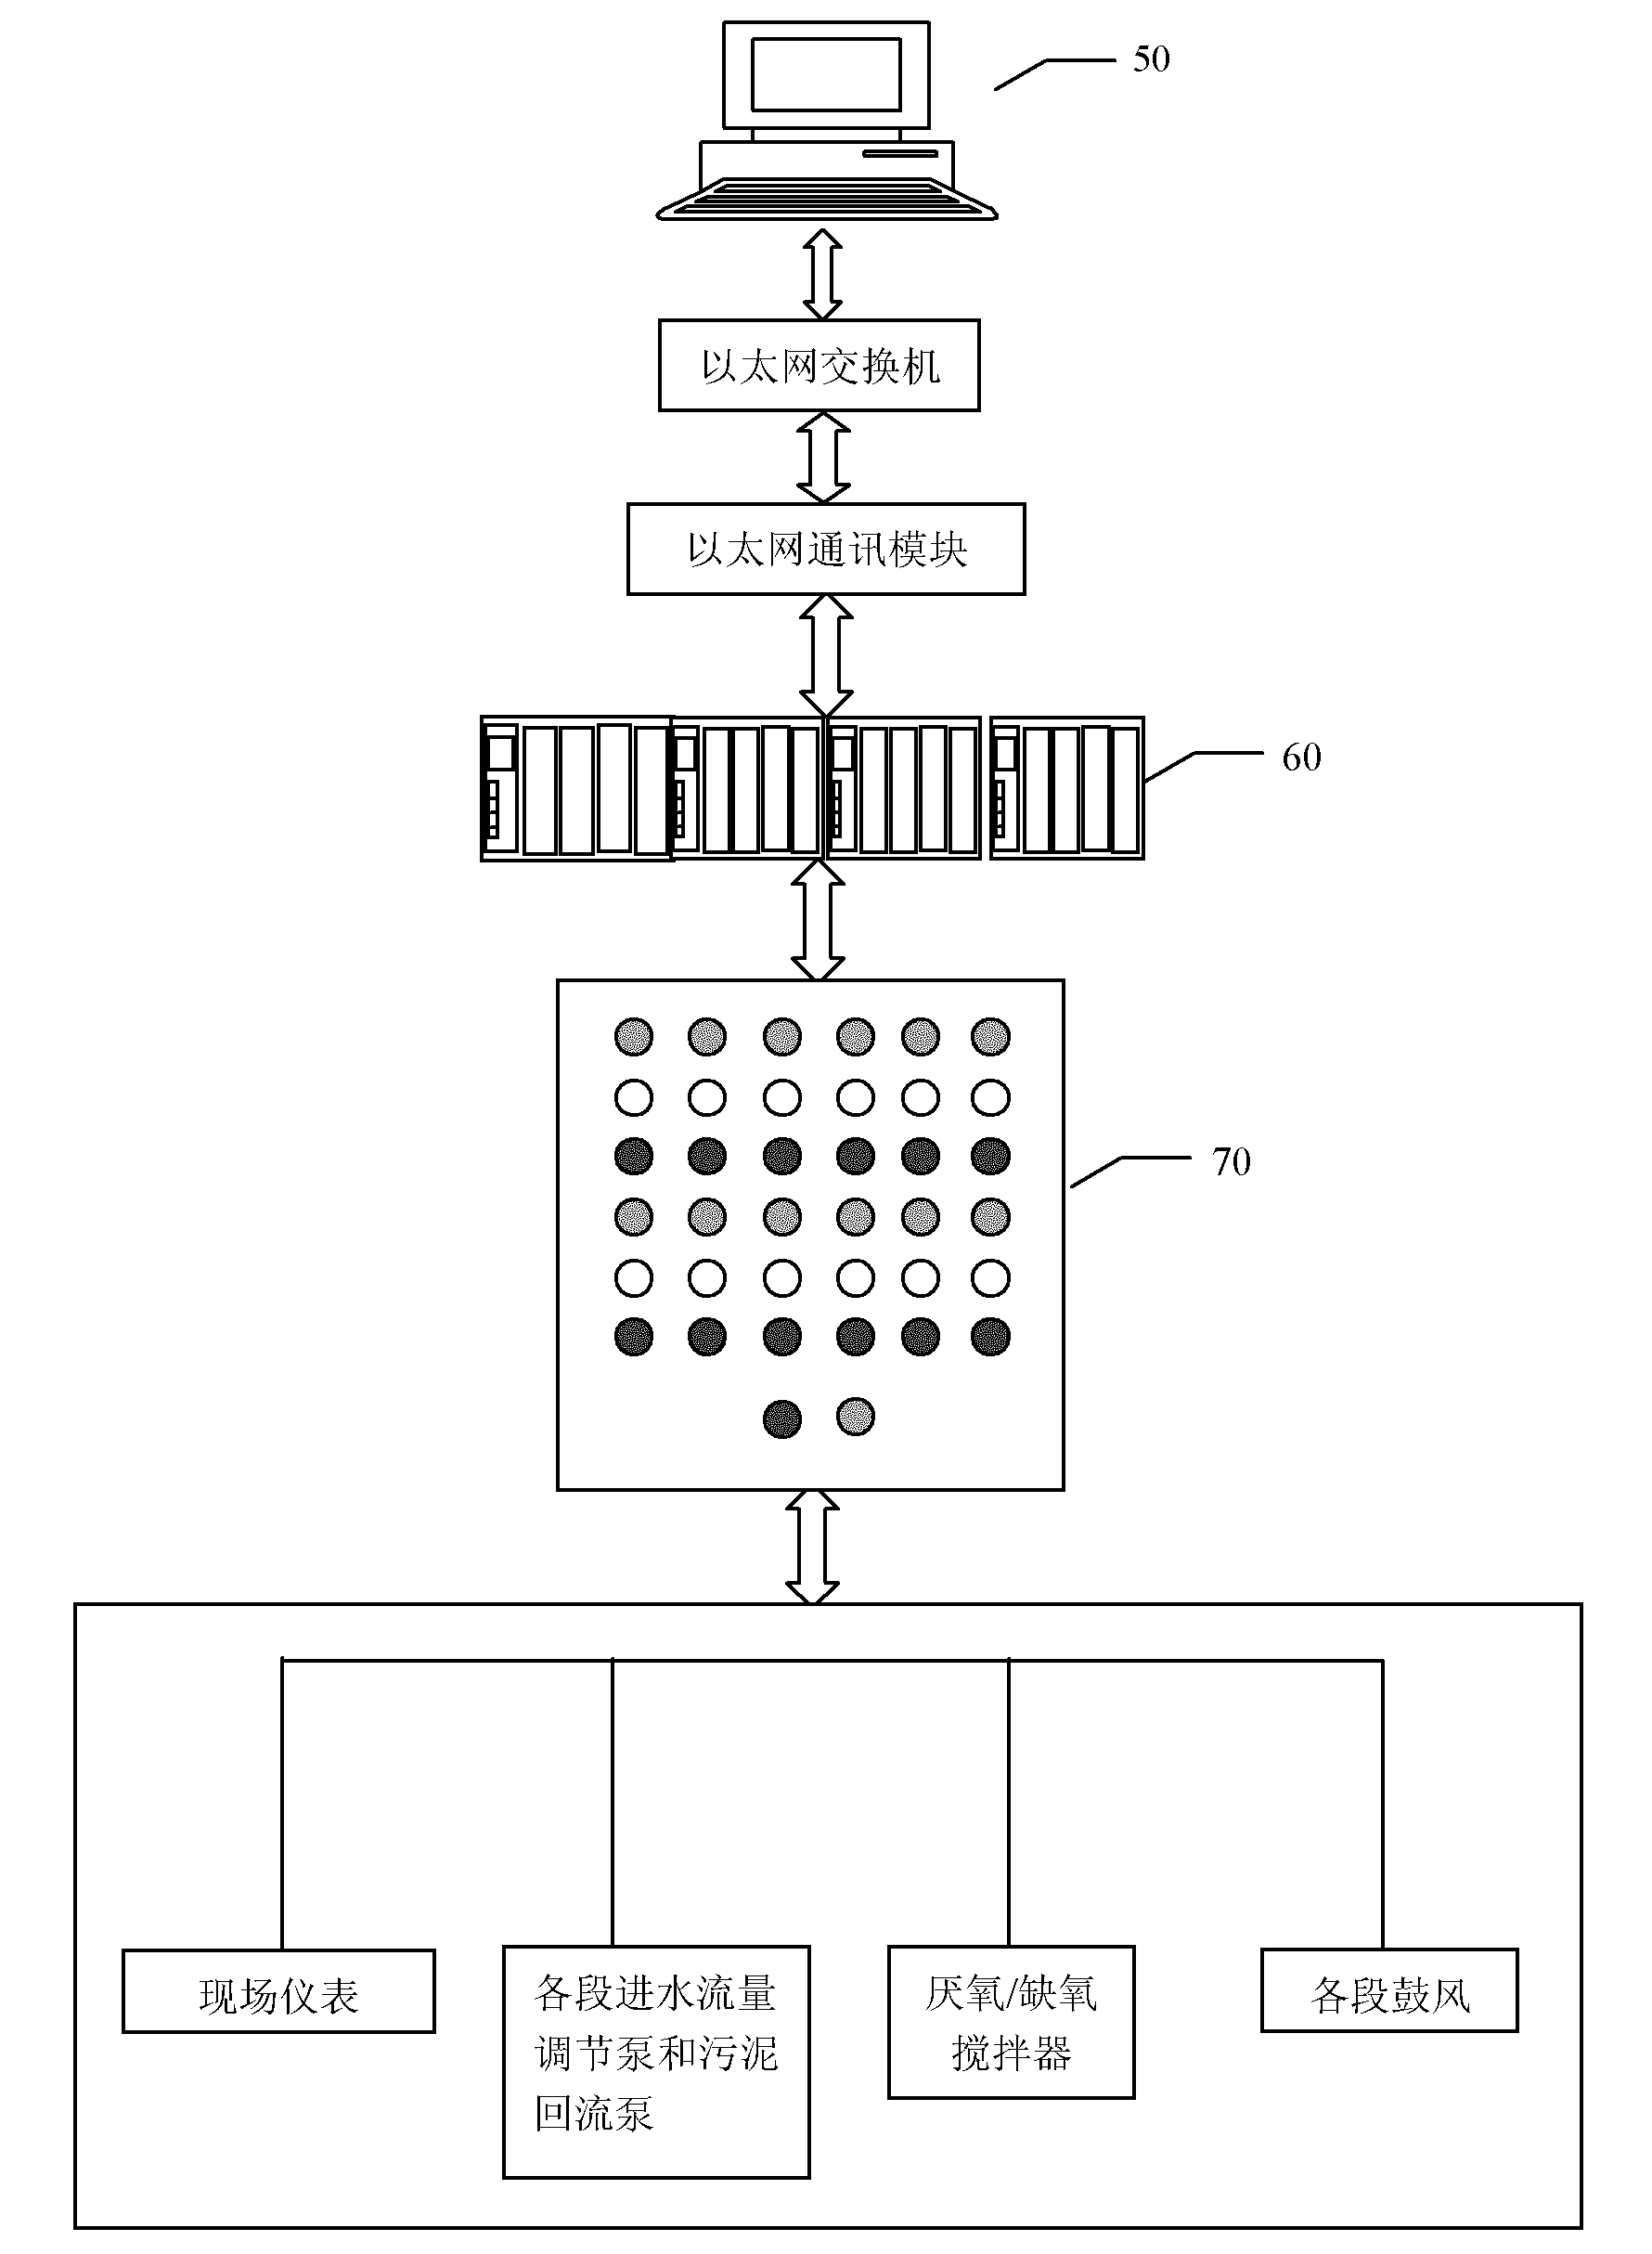 Unsteady-state sectional influent water depth nitrogen and phosphorus removal process control system and control method